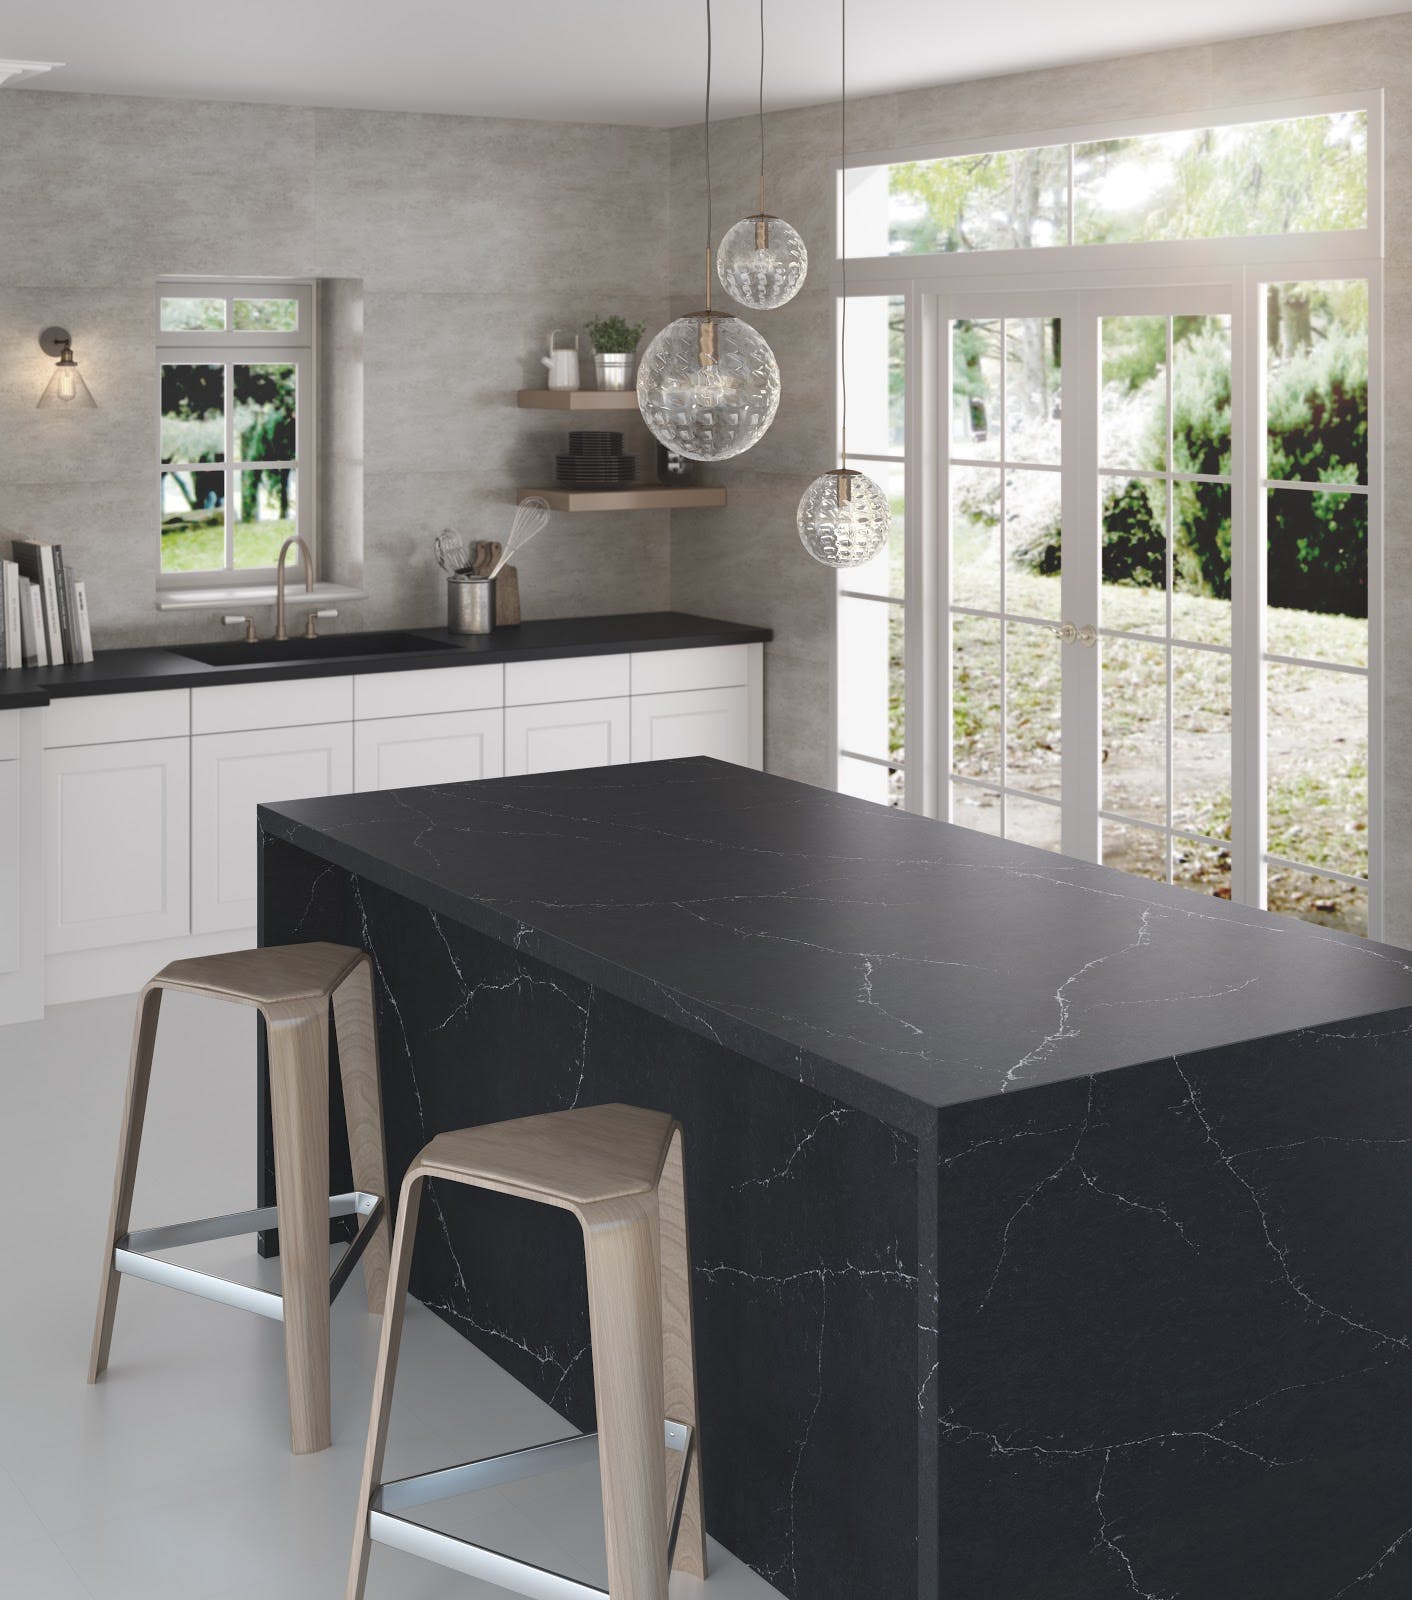 Image 39 of RS11272 Silestone Kitchen Eternal Charcoal Soapstone 2 in Compact kitchens: Who says they're a disadvantage? - Cosentino